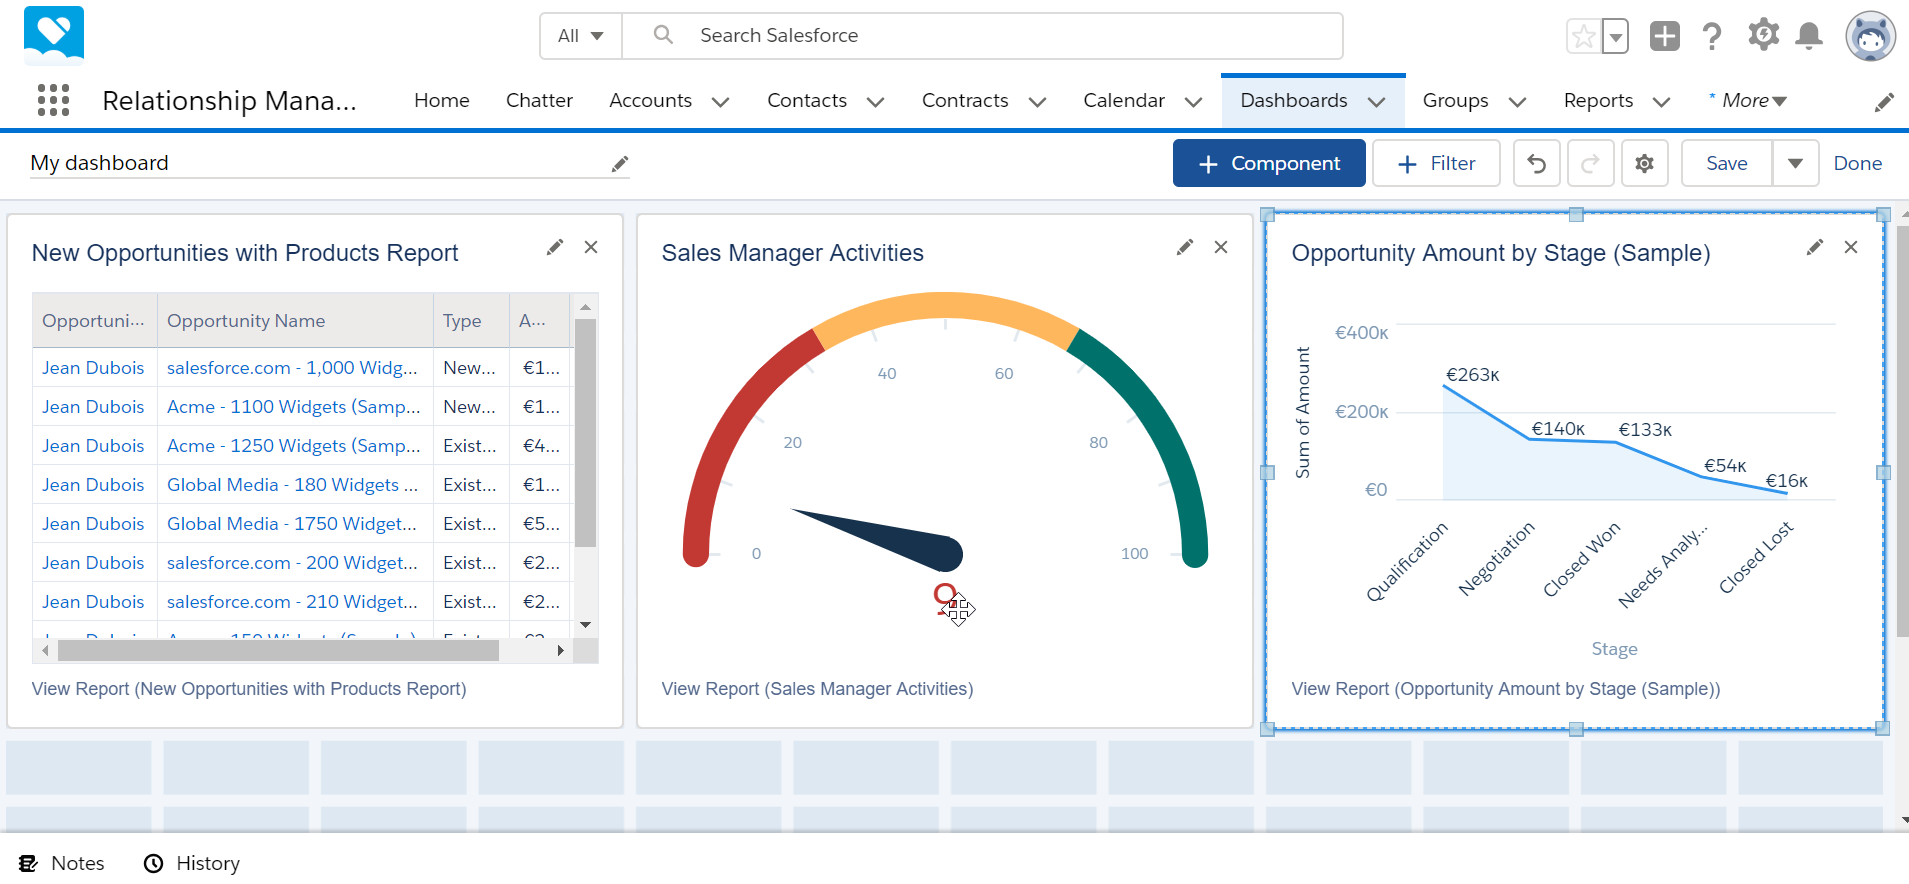 How to create a dashboard in SalesForce Lightning and add components?